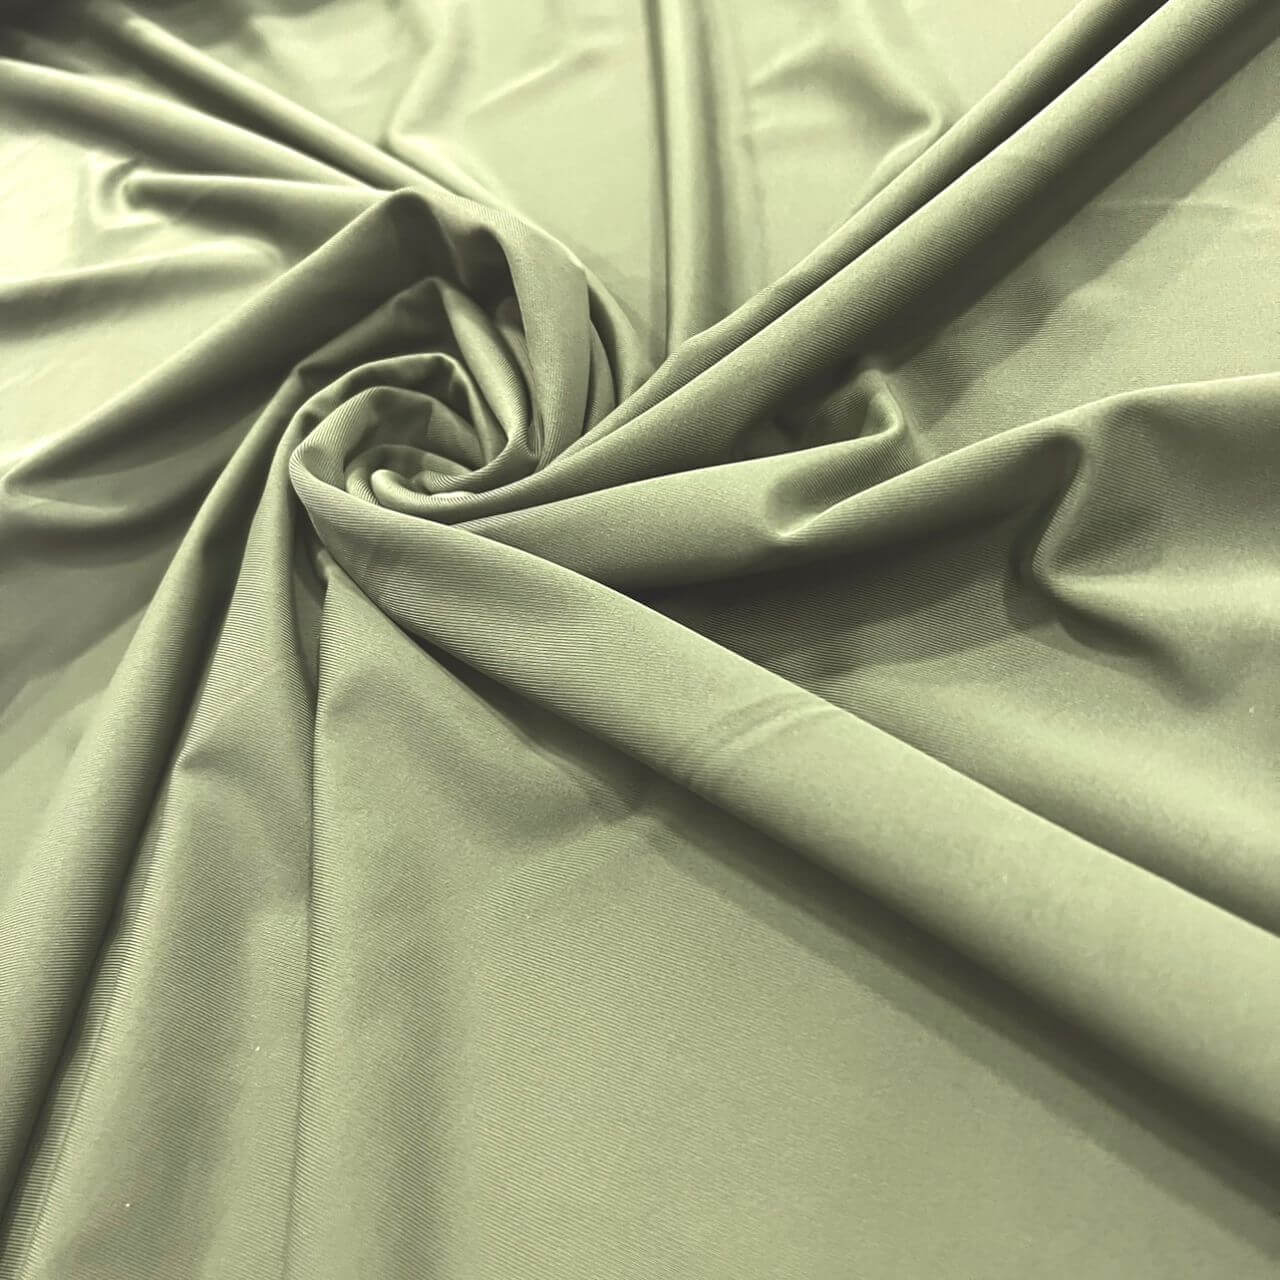 ♻️Poly Recycle Solid Light Olive Green Matte Finish Polyester Spandex  Fabric 4 Way Stretch By Yard for Swimwear (243-10)